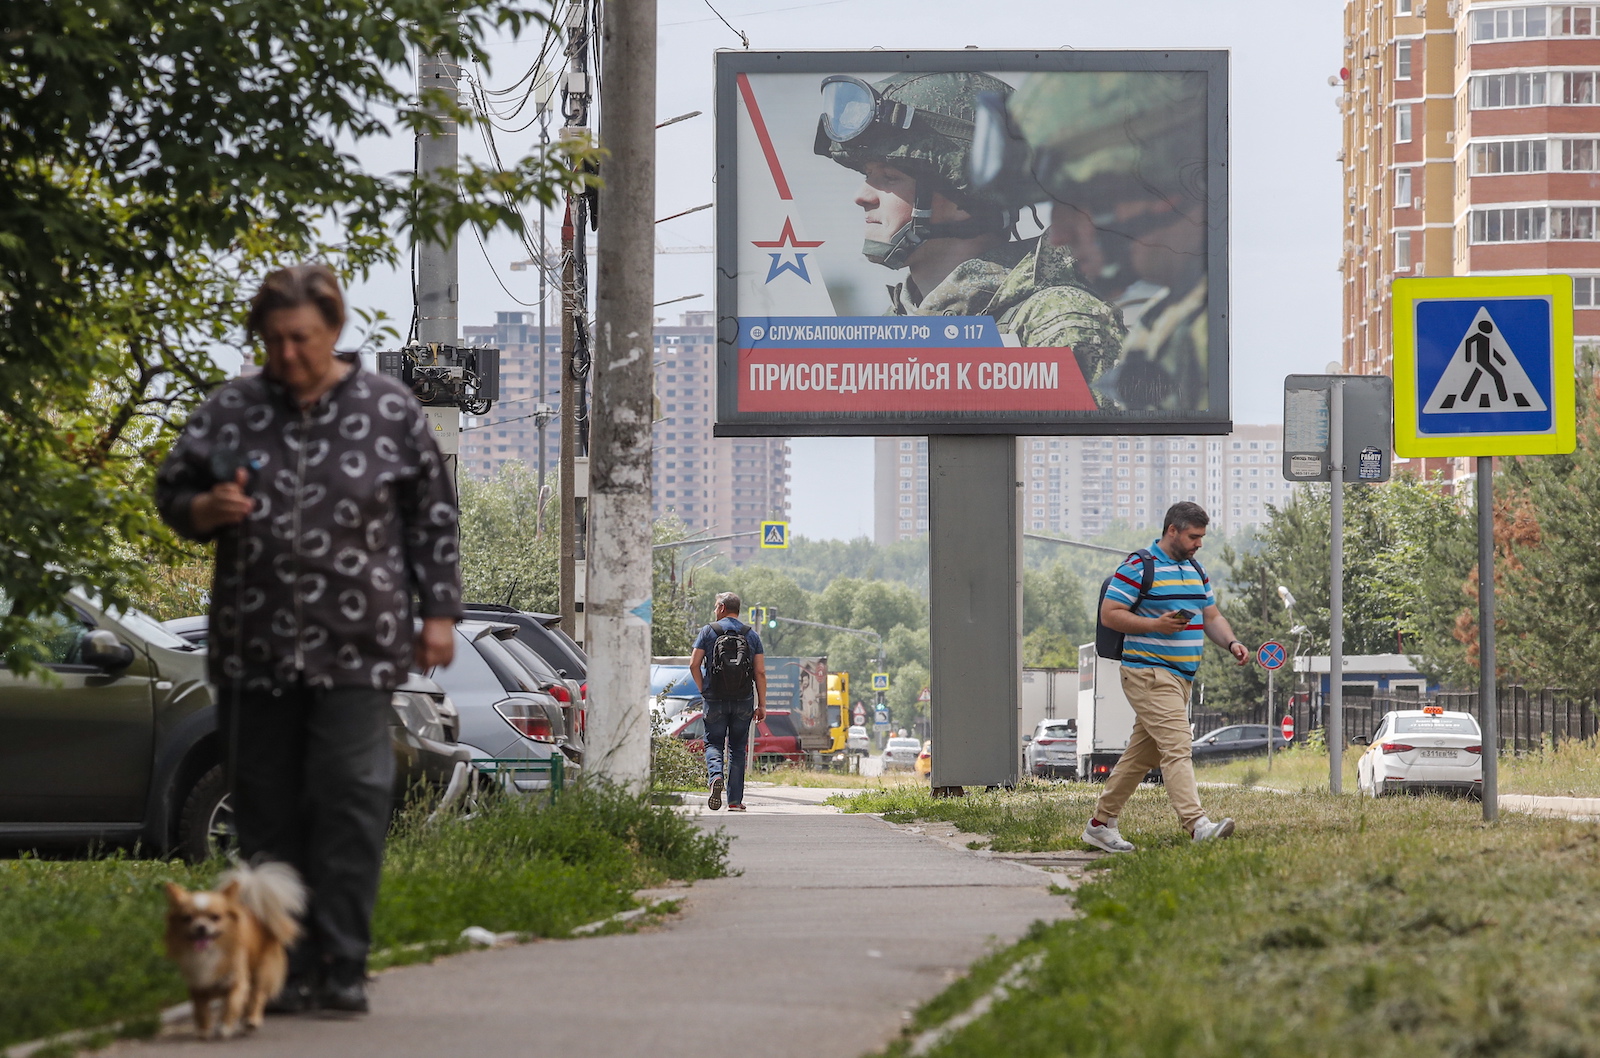 epa10713270 A billboard in support of Russian armed forces reading 'Military service under contract. Join yours' in Podolsk, Moscow region,Russia, 27 June 2023. In Russian cities, billboards with a call to join the private military company (PMC) Wagner began to be removed. On 24 June, counter-terrorism measures were enforced in Moscow and other Russian regions after private military company (PMC) Wagner Group chief Yevgeny Prigozhin claimed that his troops had occupied the building of the headquarters of the Southern Military District in Rostov-on-Don, demanding a meeting with Russia's defense chiefs. Belarusian President Lukashenko, a close ally of Putin, negotiated a deal with Wagner chief Prigozhin to stop the movement of the group's fighters across Russia, the press service of the President of Belarus reported. The negotiations were said to have lasted for the entire day. Prigozhin announced that Wagner fighters were turning their columns around and going back in the other direction, returning to their field camps.  EPA/MAXIM SHIPENKOV